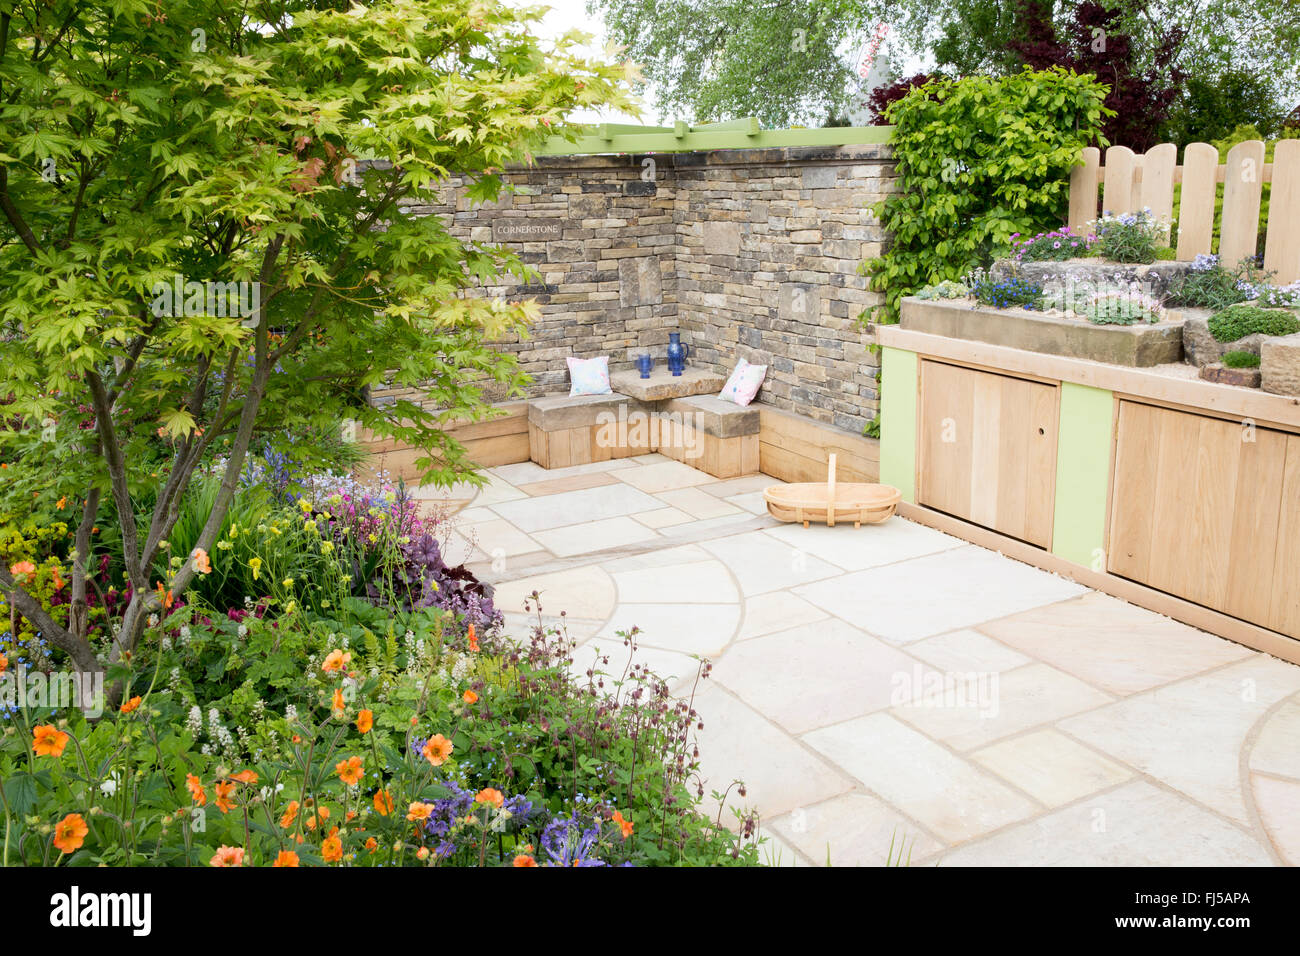 A small English garden with flower beds and a stone slabs patio - storage bench - stone bench and alpine plants in stone troughs containers Spring UK Stock Photo